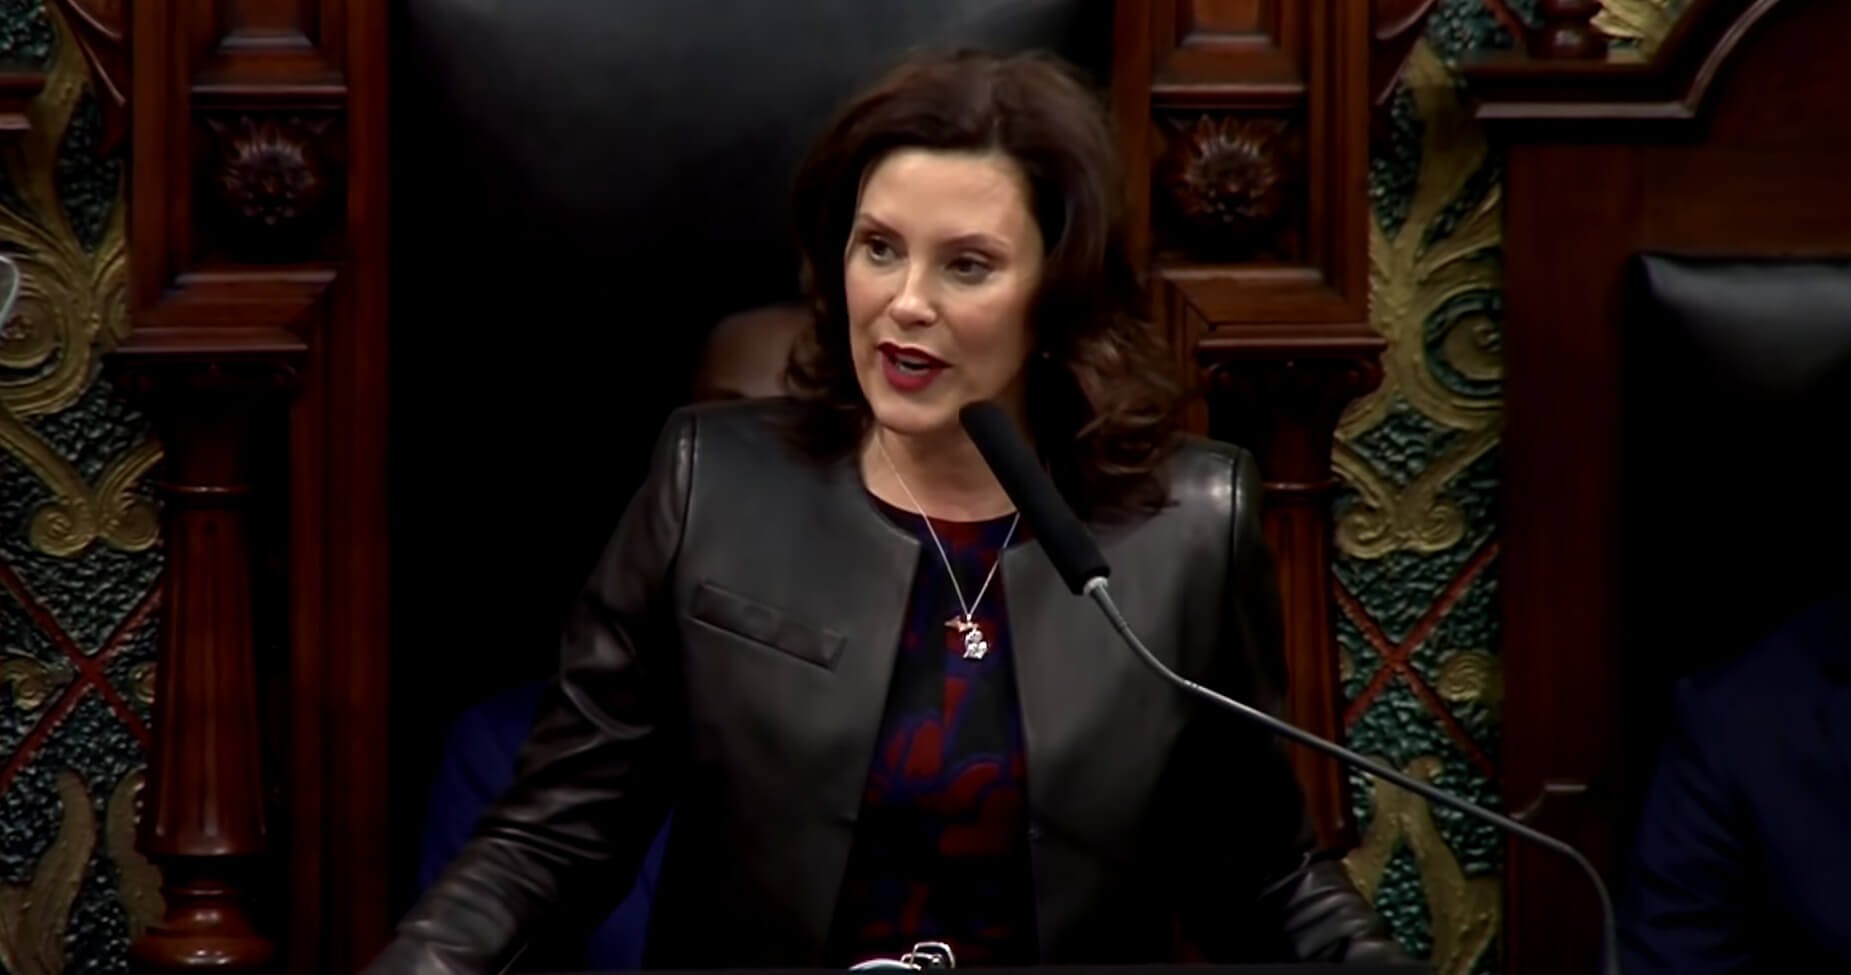 Gretchen Whitmer How To Watch The 2020 State of the Union